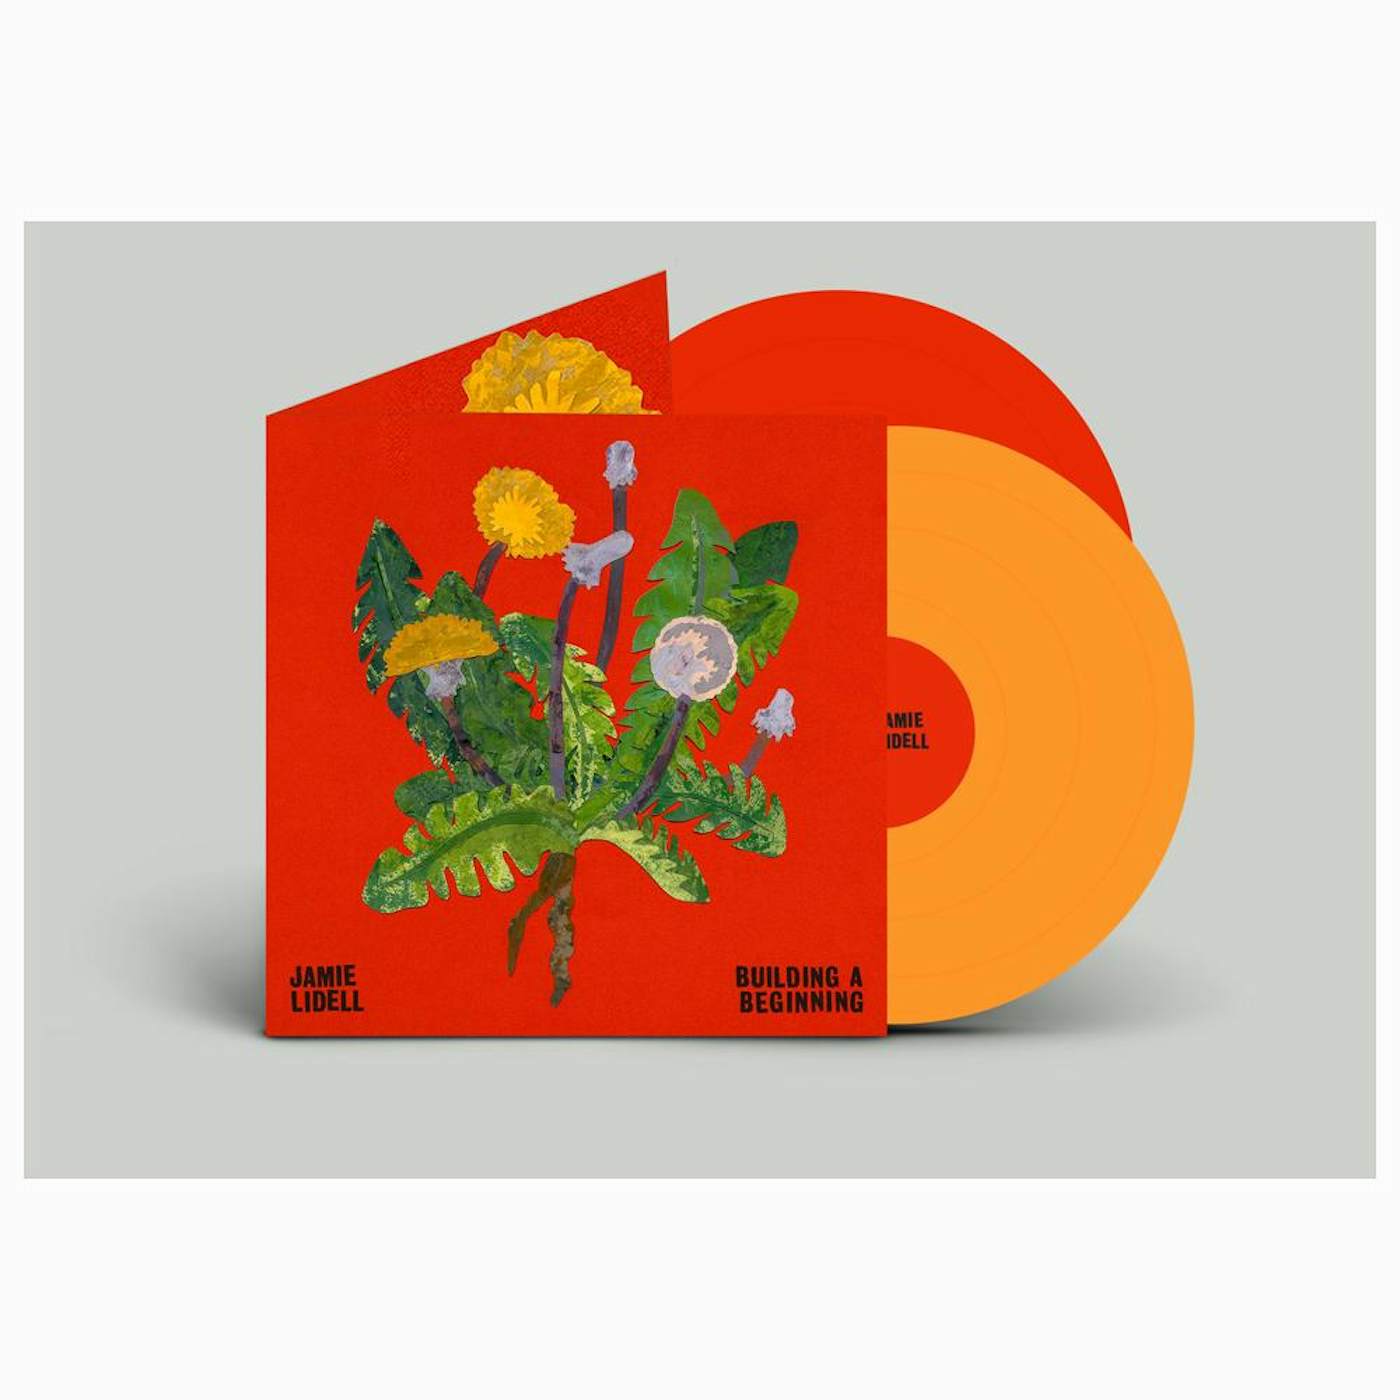 Jamie Lidell - Building A Beginning Limited Edition Vinyl (Red and Yellow)